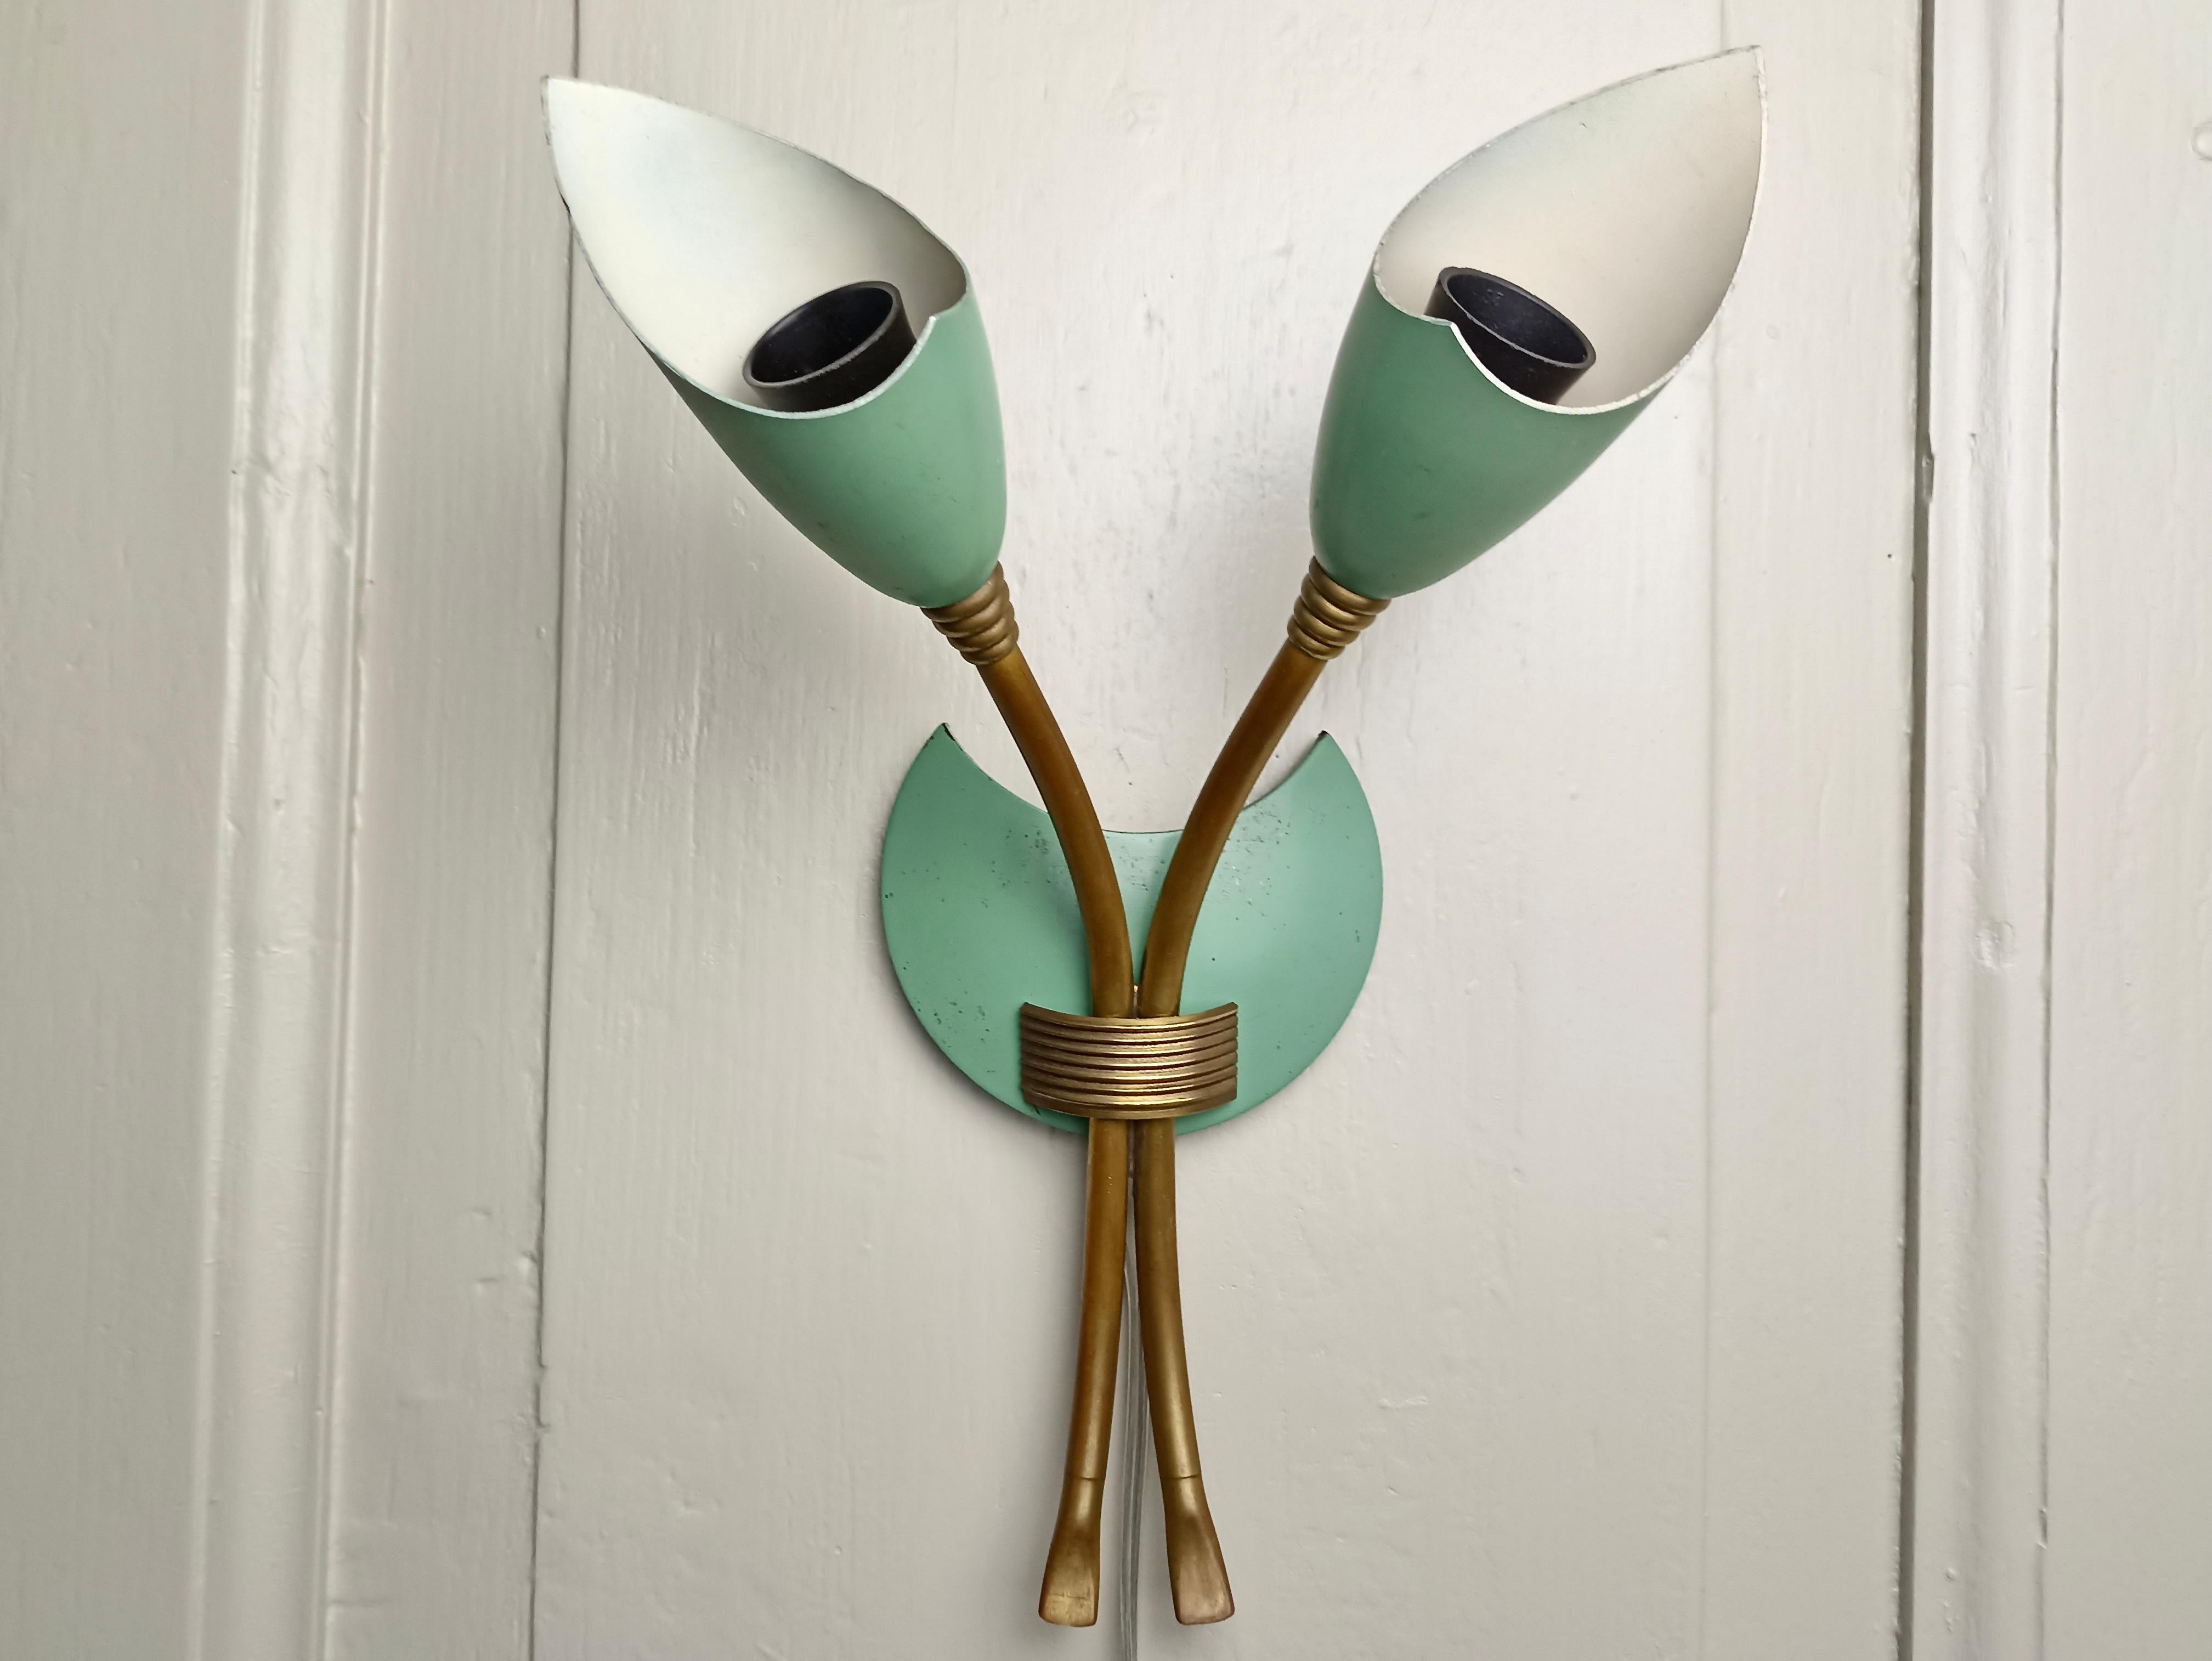 Pretty 1950s two-light rare Italian single wall sconce in brass and light turquoise green lacquered metal, typical of the period. No trademarks are present on the lamp however its design refers to the style of Stilnovo. 
Professionally